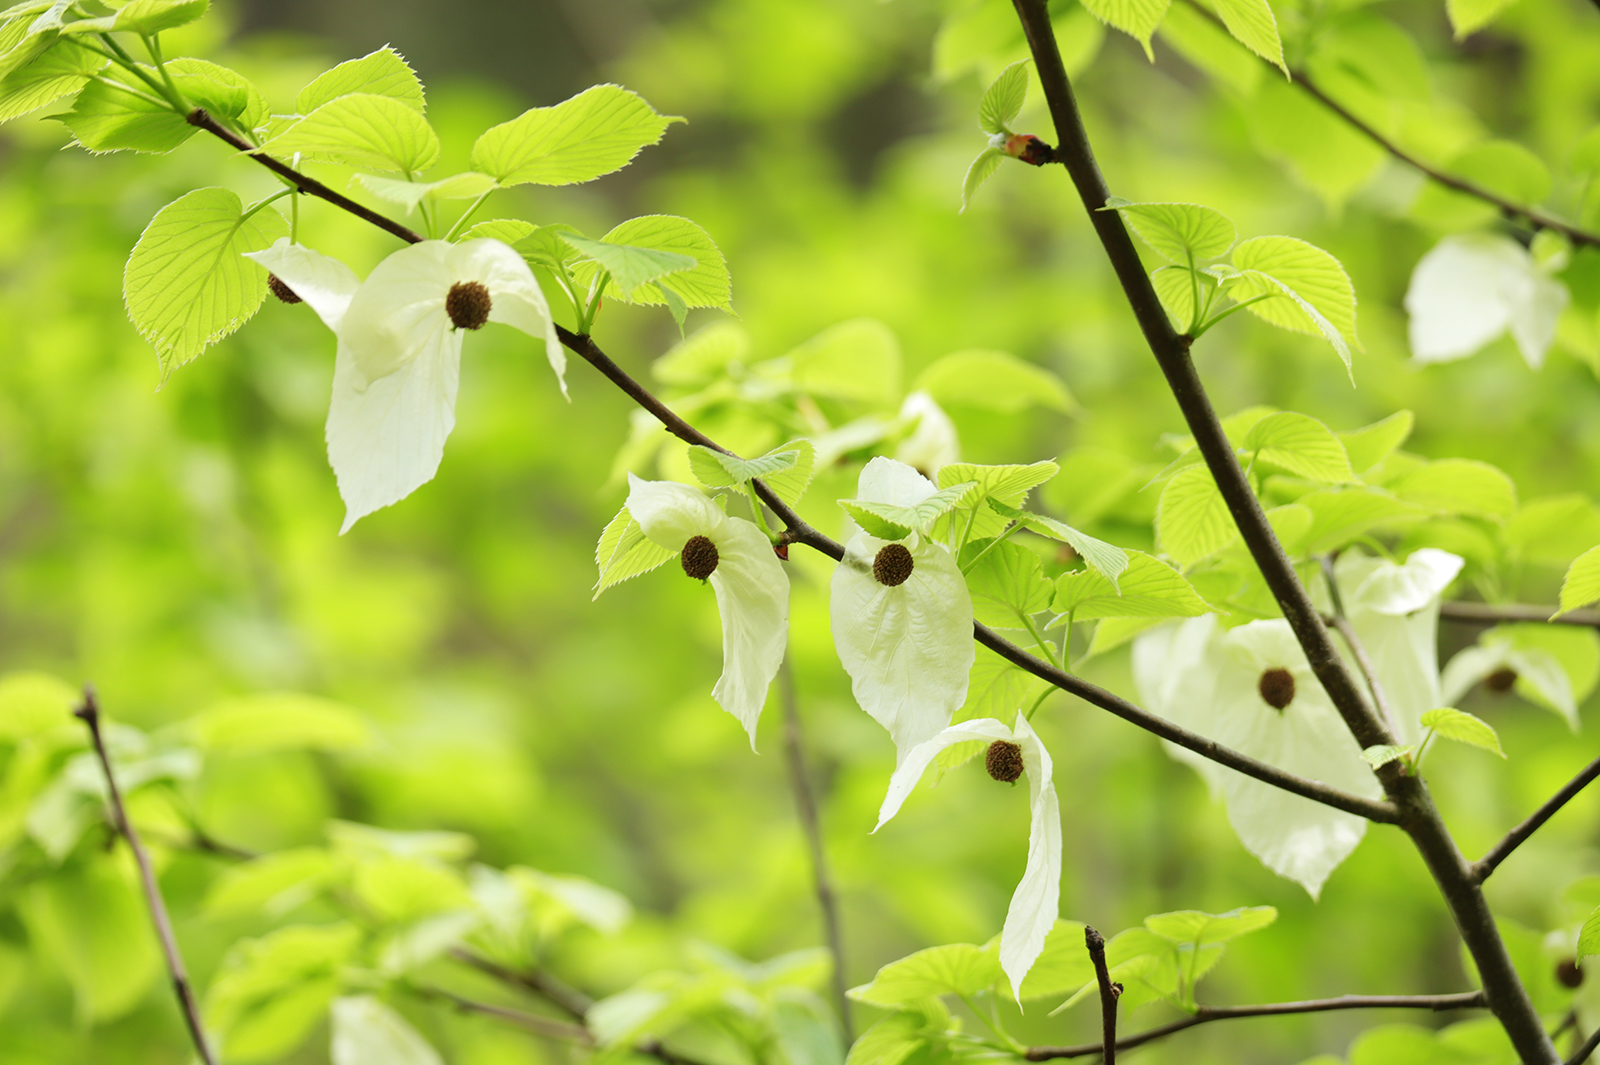 The Chinese dove trees at the western foot of Mount Fanjing in Tongren, Guizhou Province are in full bloom, resembling white doves flying in the forest. /Photo provide to CGTN by Tongren Integrated Media Center of Guizhou